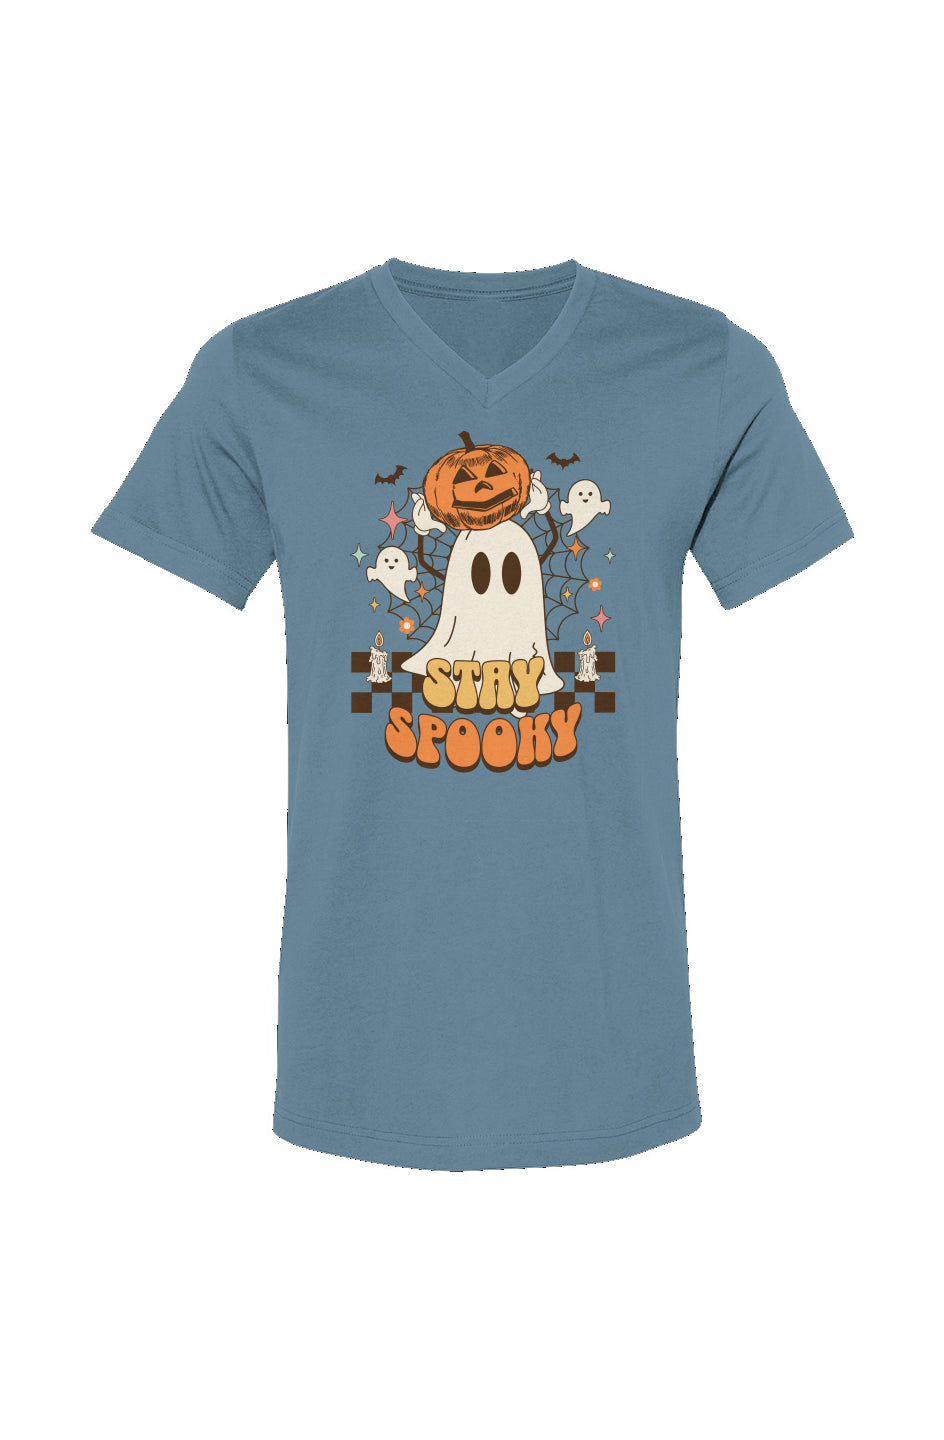 "Stay Spooky" Unisex Fit 